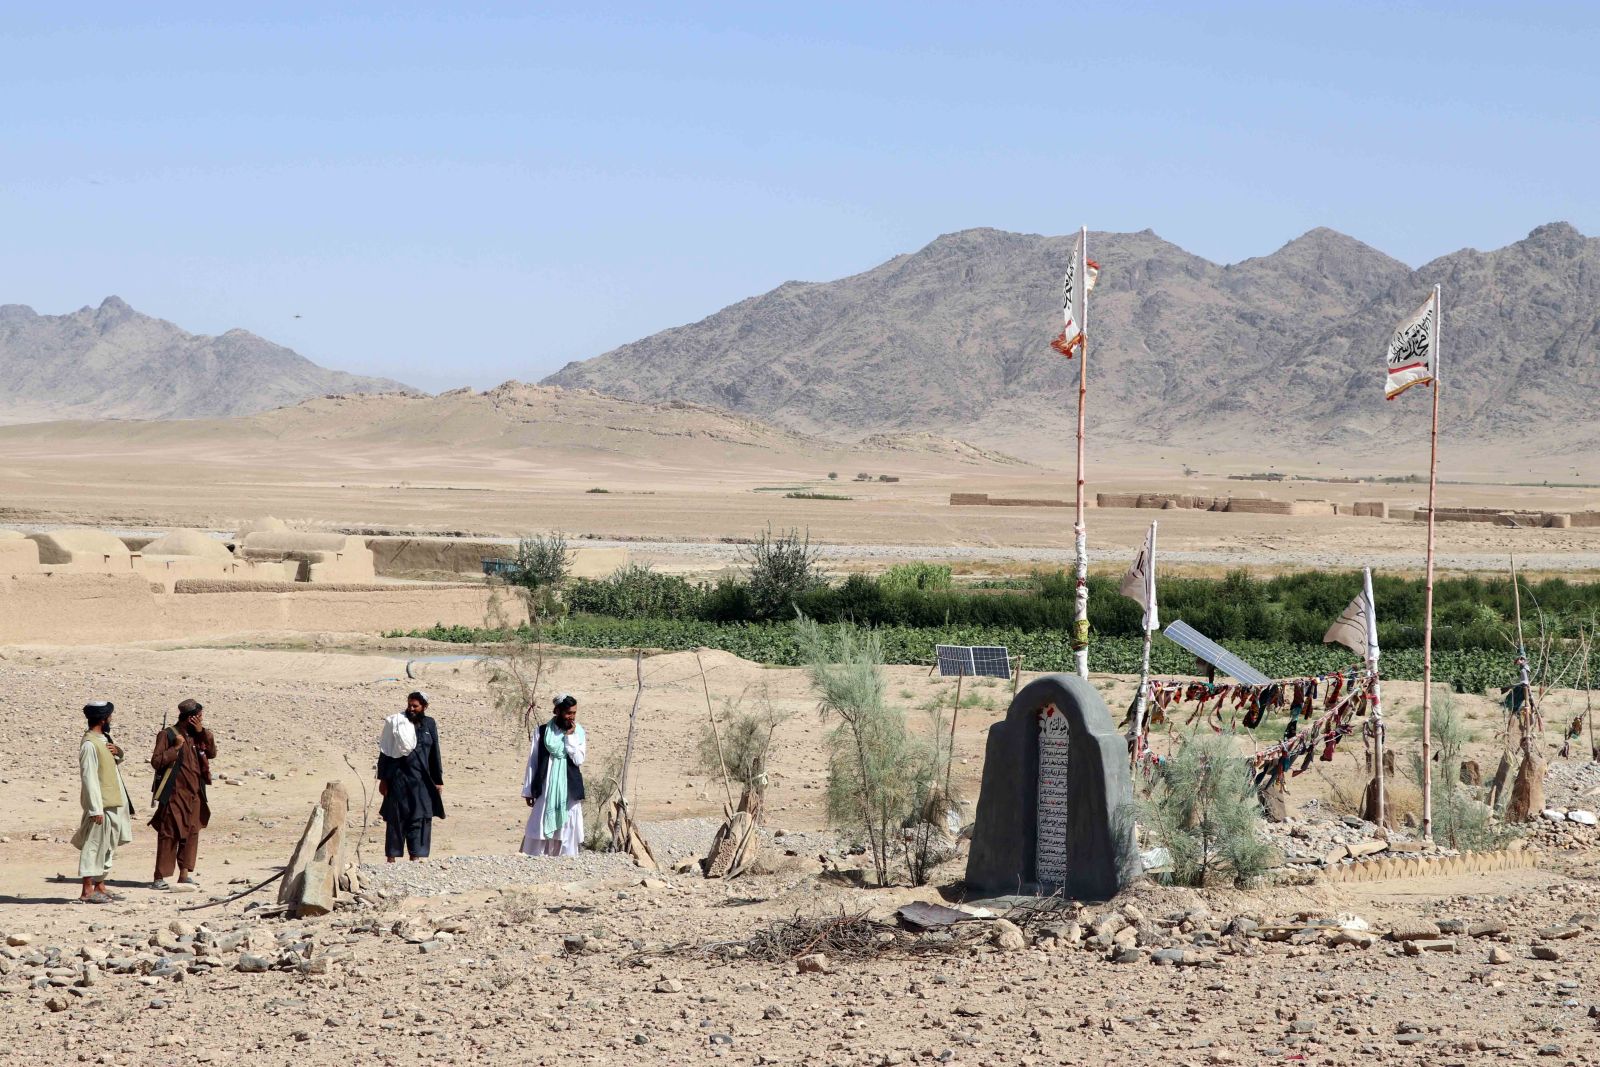 epa10208237 Taliban and local residents visit the site of a mass-grave and the re-burial of the mortal remains, that was found by locals in Spin Boldak, Kandahar, Afghanistan, 26 September 2022. Taliban officials said on 26 September, that the remains of 12 people were found in a mass grave in Spin Boldak, a town on the border with Pakistan, a few days ago. Spin Boldak was the site of fierce fighting between the Afghan government and Taliban fighters before the Taliban took power in 2021. The UN rapporteur for Afghanistan’s human rights Richard Bennett said that it is 'important these remains are not disturbed and damaged further pending forensic examination, while being sensitive to needs of families.' The deputy spokesman of the Islamic Emirate, Bilal Karimi, said that the grave site and human remains are from eight years ago and that investigations are underway in this regard.  EPA/STRINGER